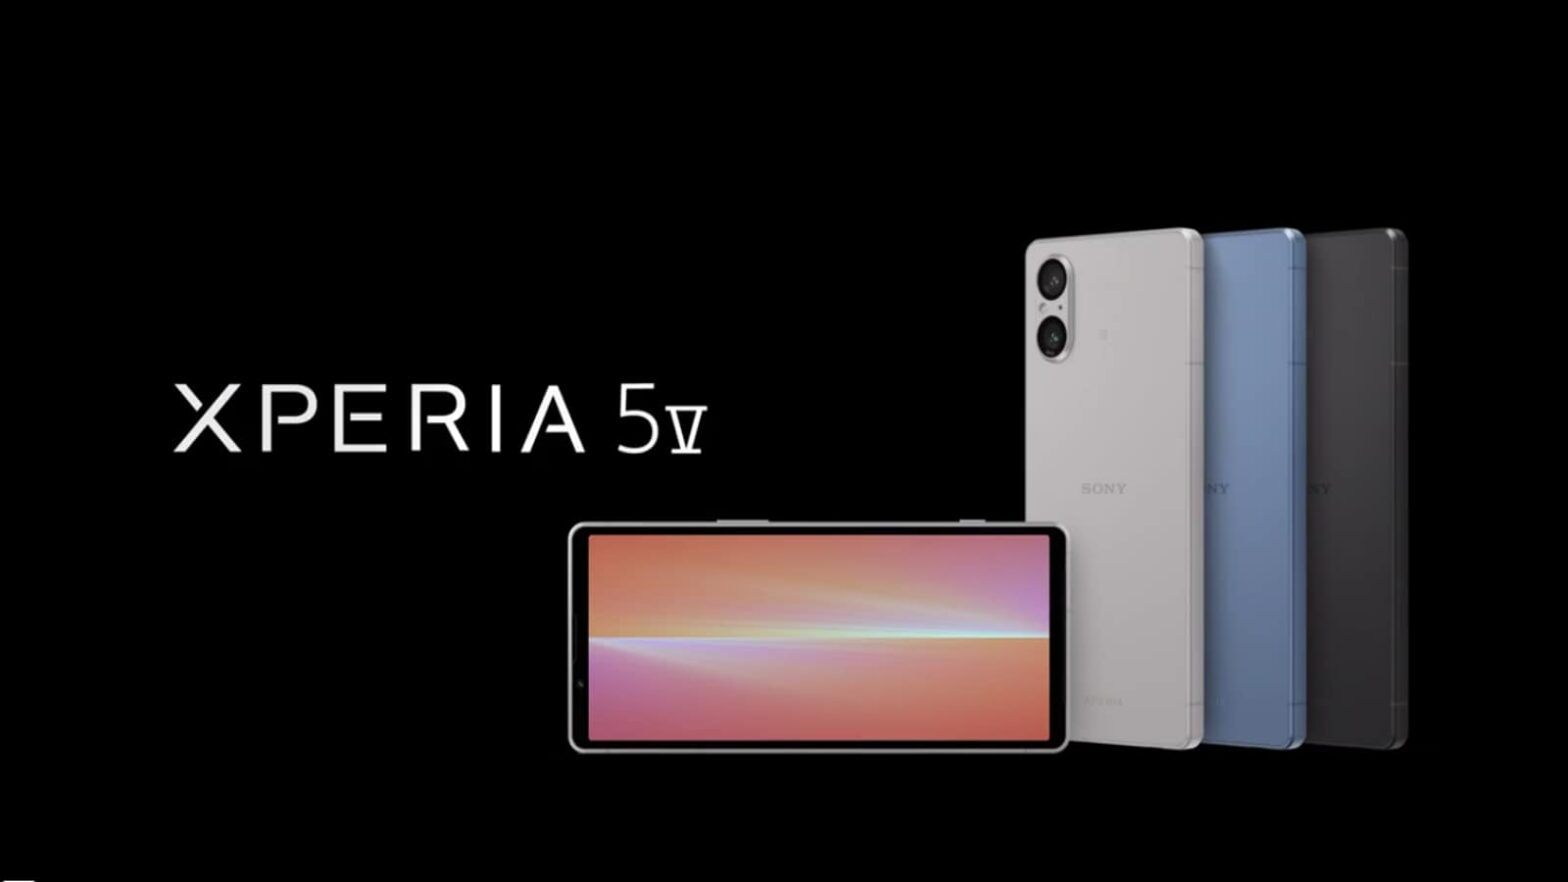 A new Sony Xperia smartphone is set to launch next week